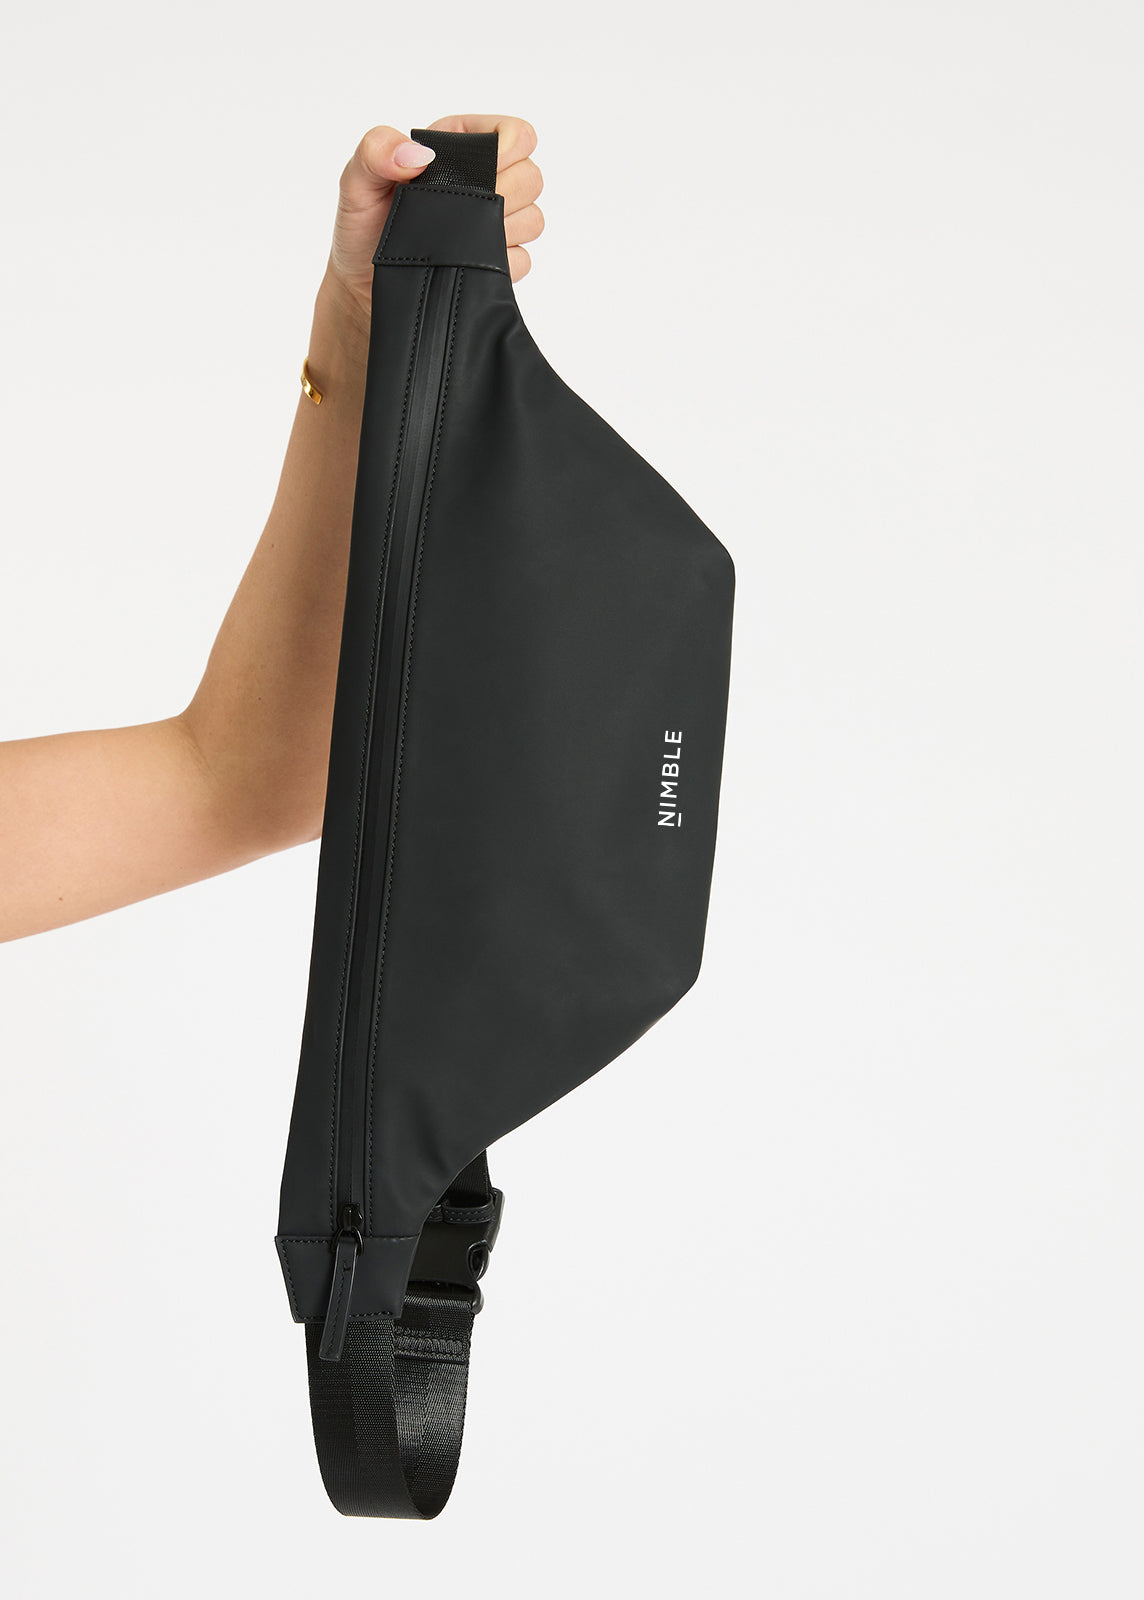 Model Holding A Black Splash Proof Cross Body Bag With Contrasting White Nimble Logo To The Centre Bottom.